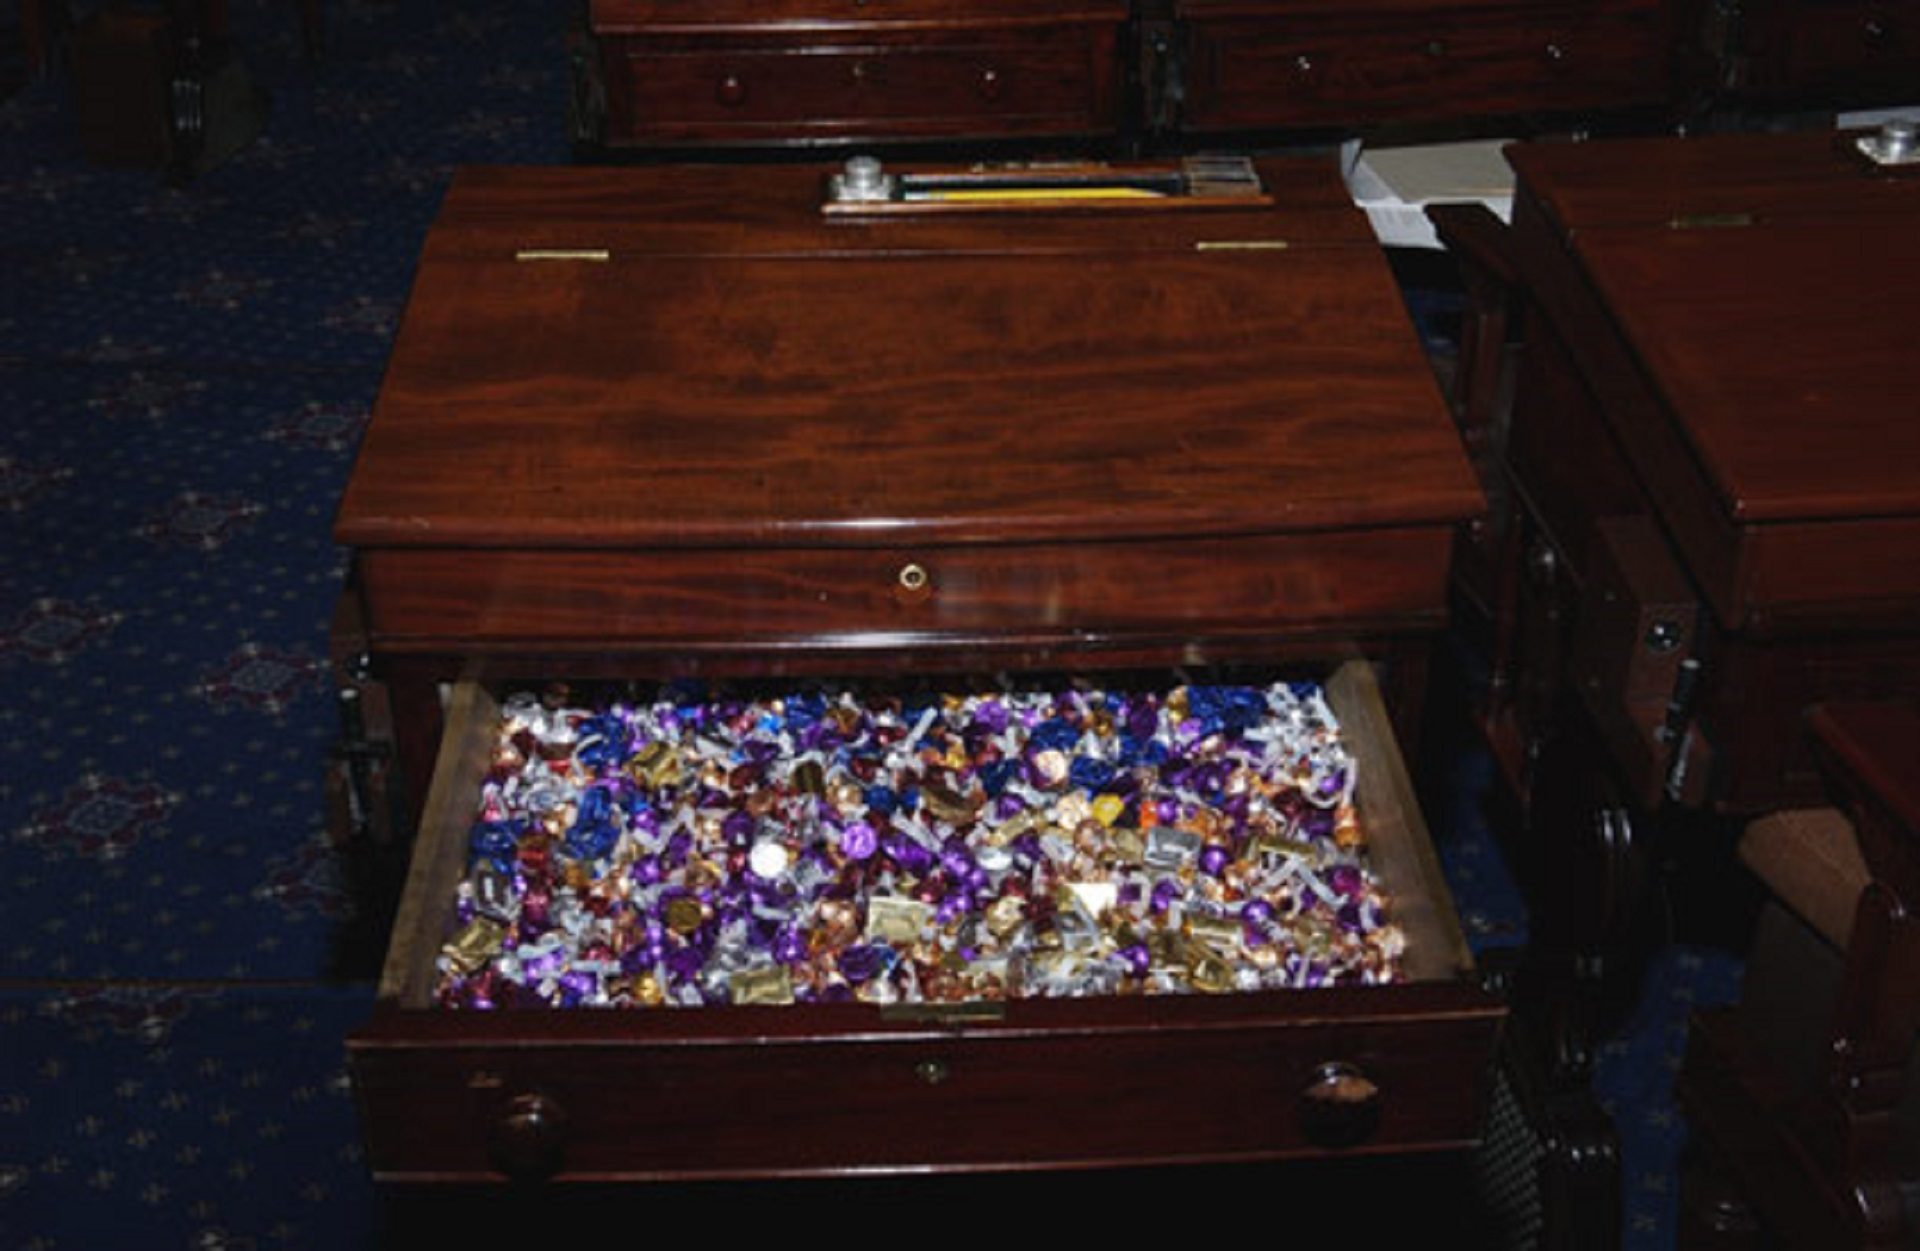 The "candy desk" in the United States Senate began in 1965.